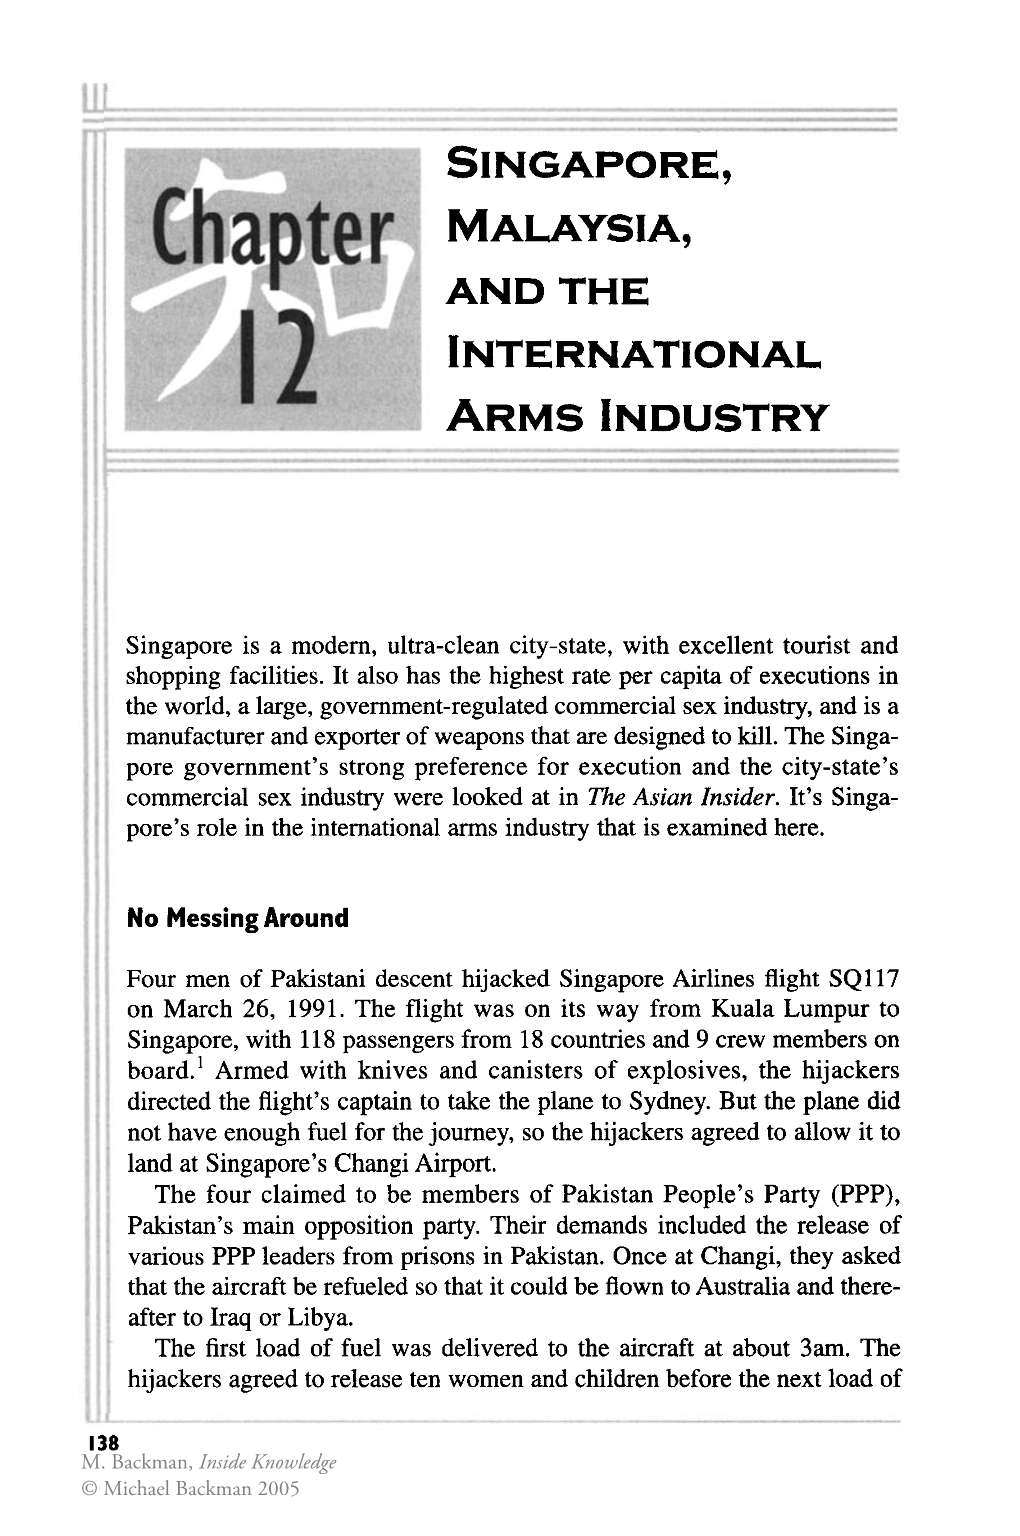 Singapore, Malaysia, and the International Arms Industry